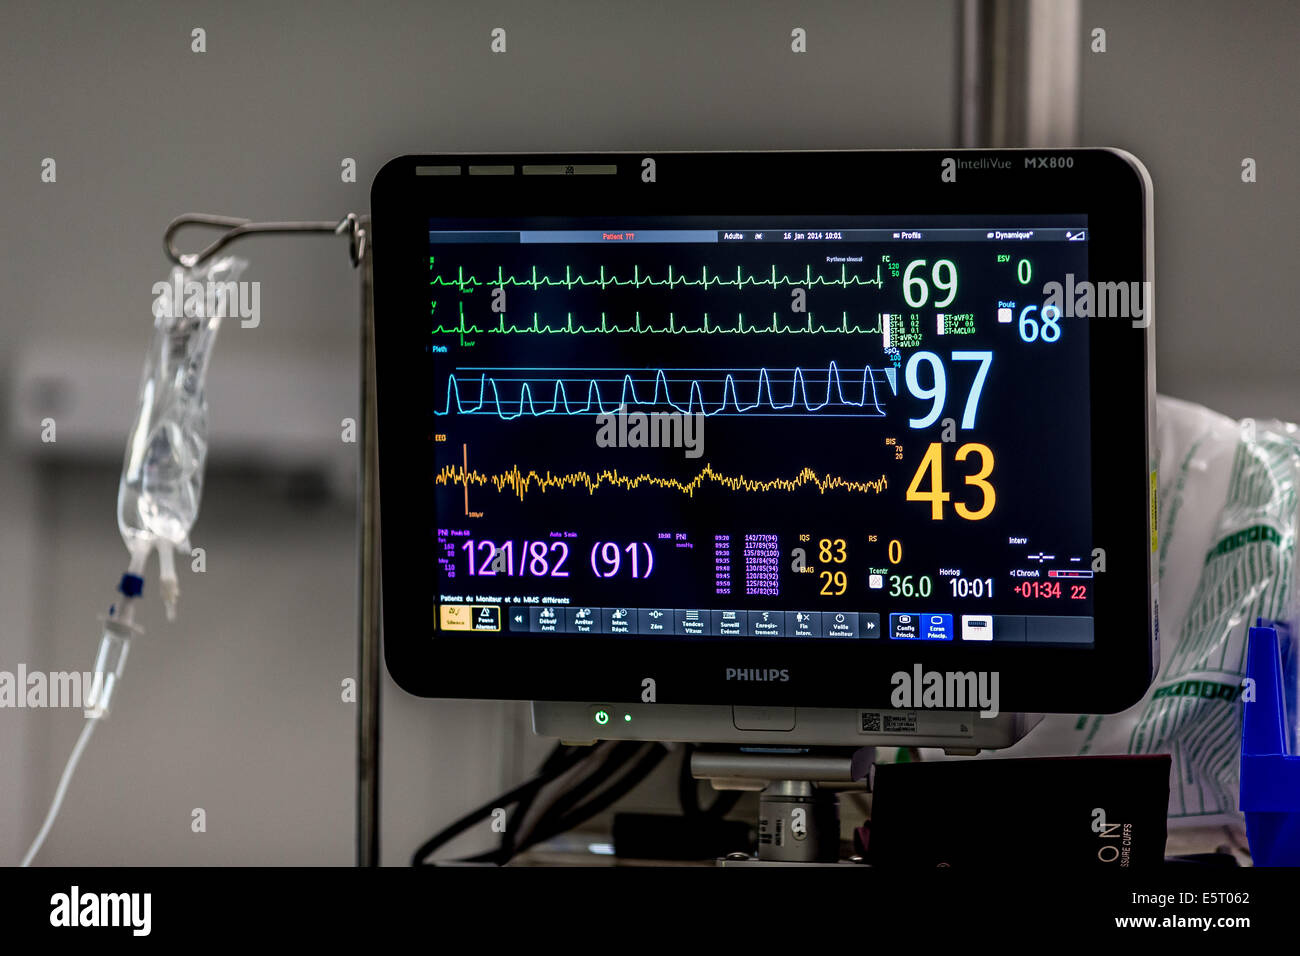 Medical Vital Sign Monitor Screen Operating Room Hospital Heart Rate Stock  Photo by ©cvtman@hotmail.com 648419706